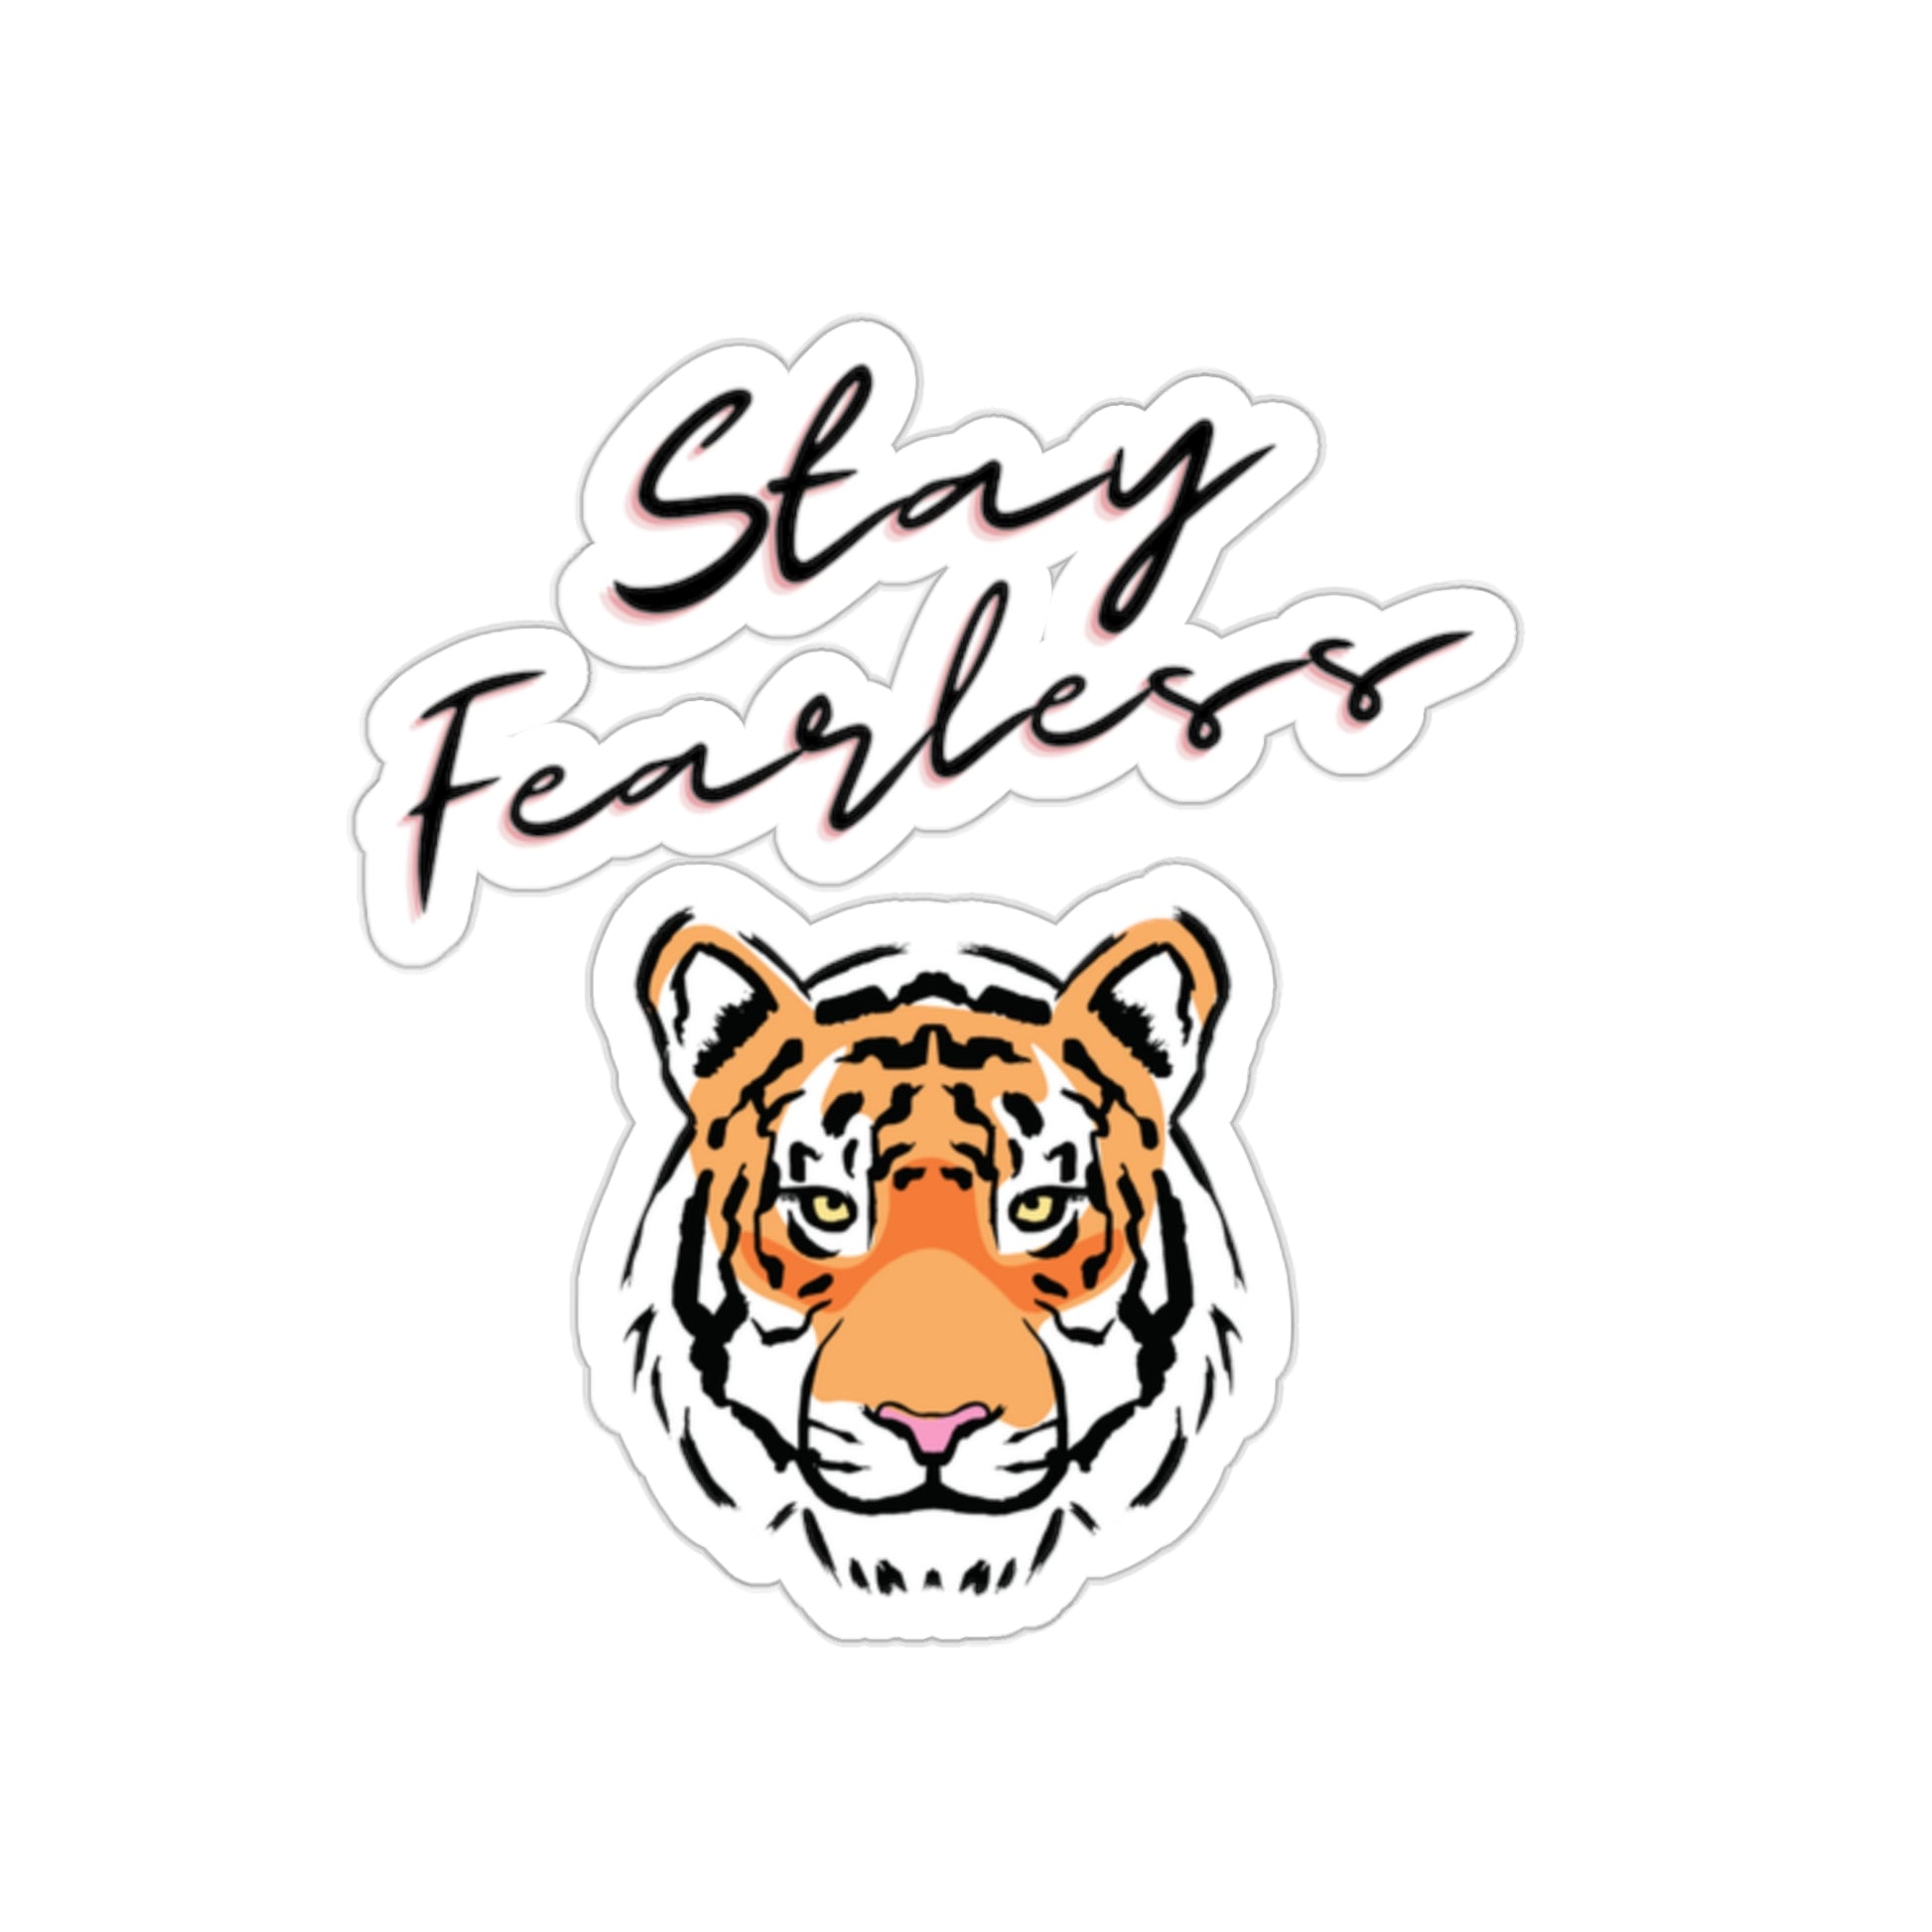 Stay Fearless Kiss-Cut Stickers Cat Lady Attitude Stickers Love Tigers Tiger Love Love Cats Cat Lover Cute Tiger Fun Decal Cattitude Empower - The Good Life Vibe